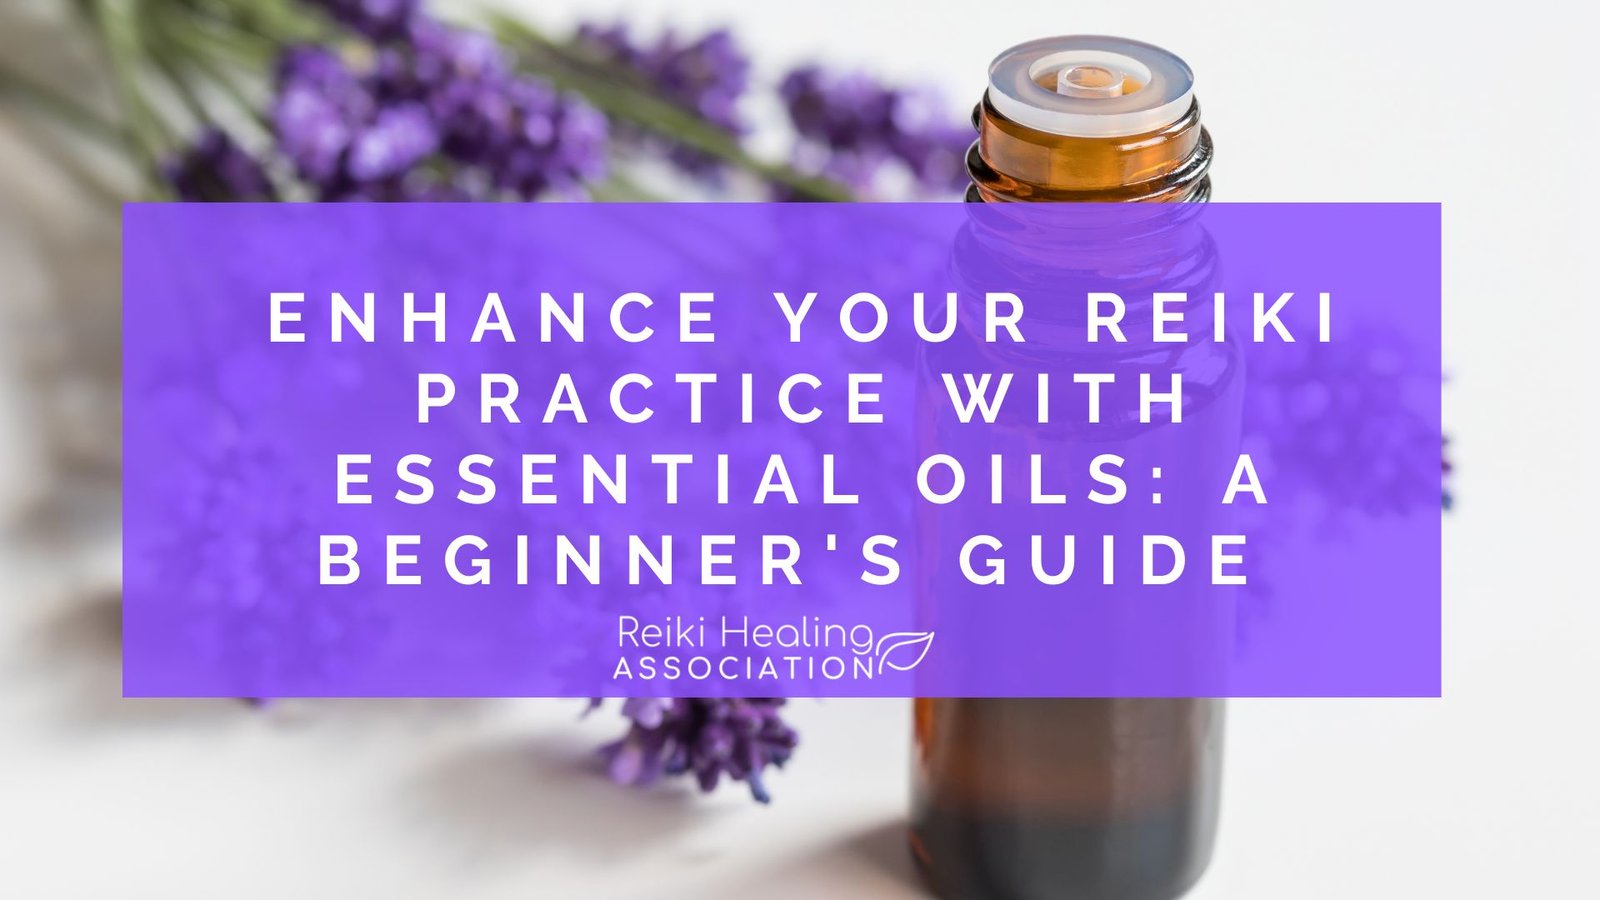 Enhance Your Reiki Practice with Essential Oils: A Beginner's Guide